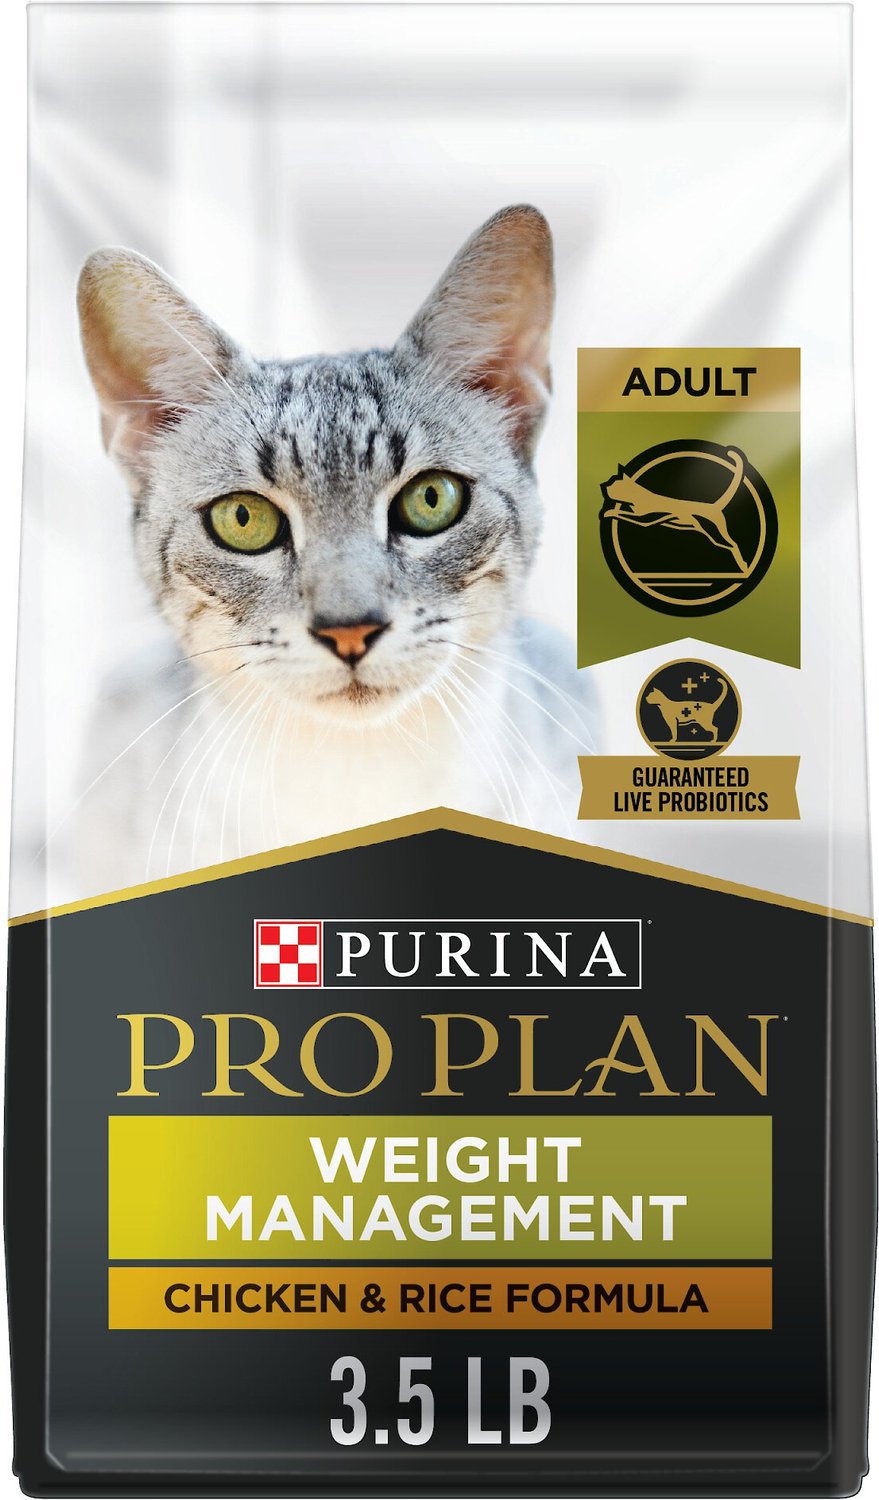 PURINA PRO PLAN Adult Weight Management Chicken & Rice Formula Dry Cat